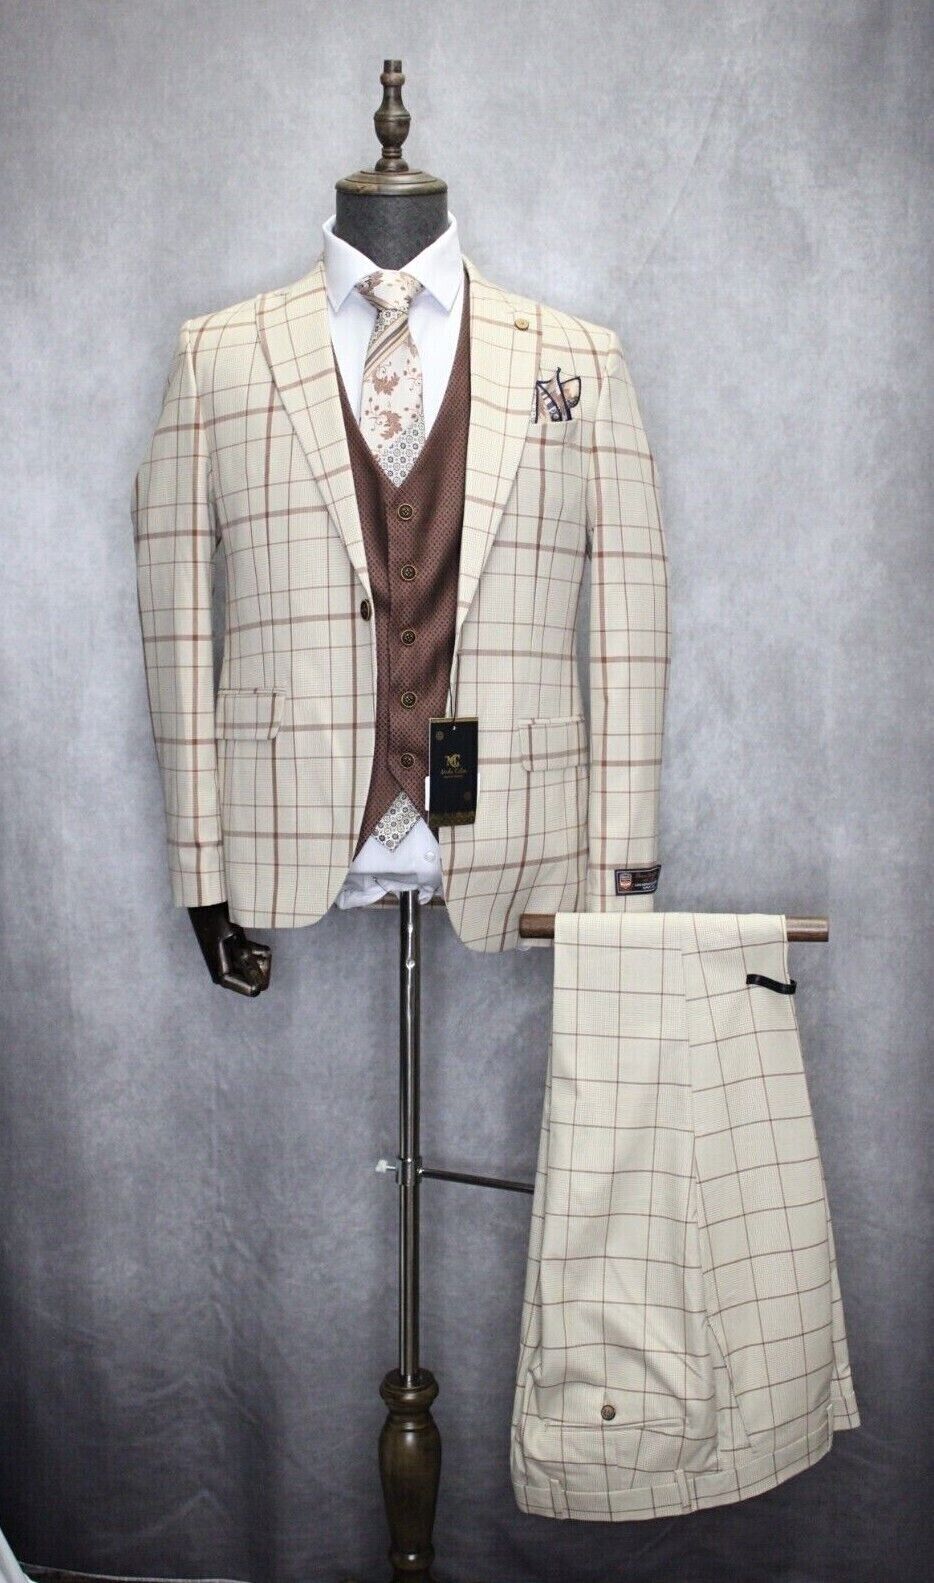 Mens Turkish Suit 3pc Slim Fit Beige and Brown Plaid By Moda Color K231-30 Suits In Style